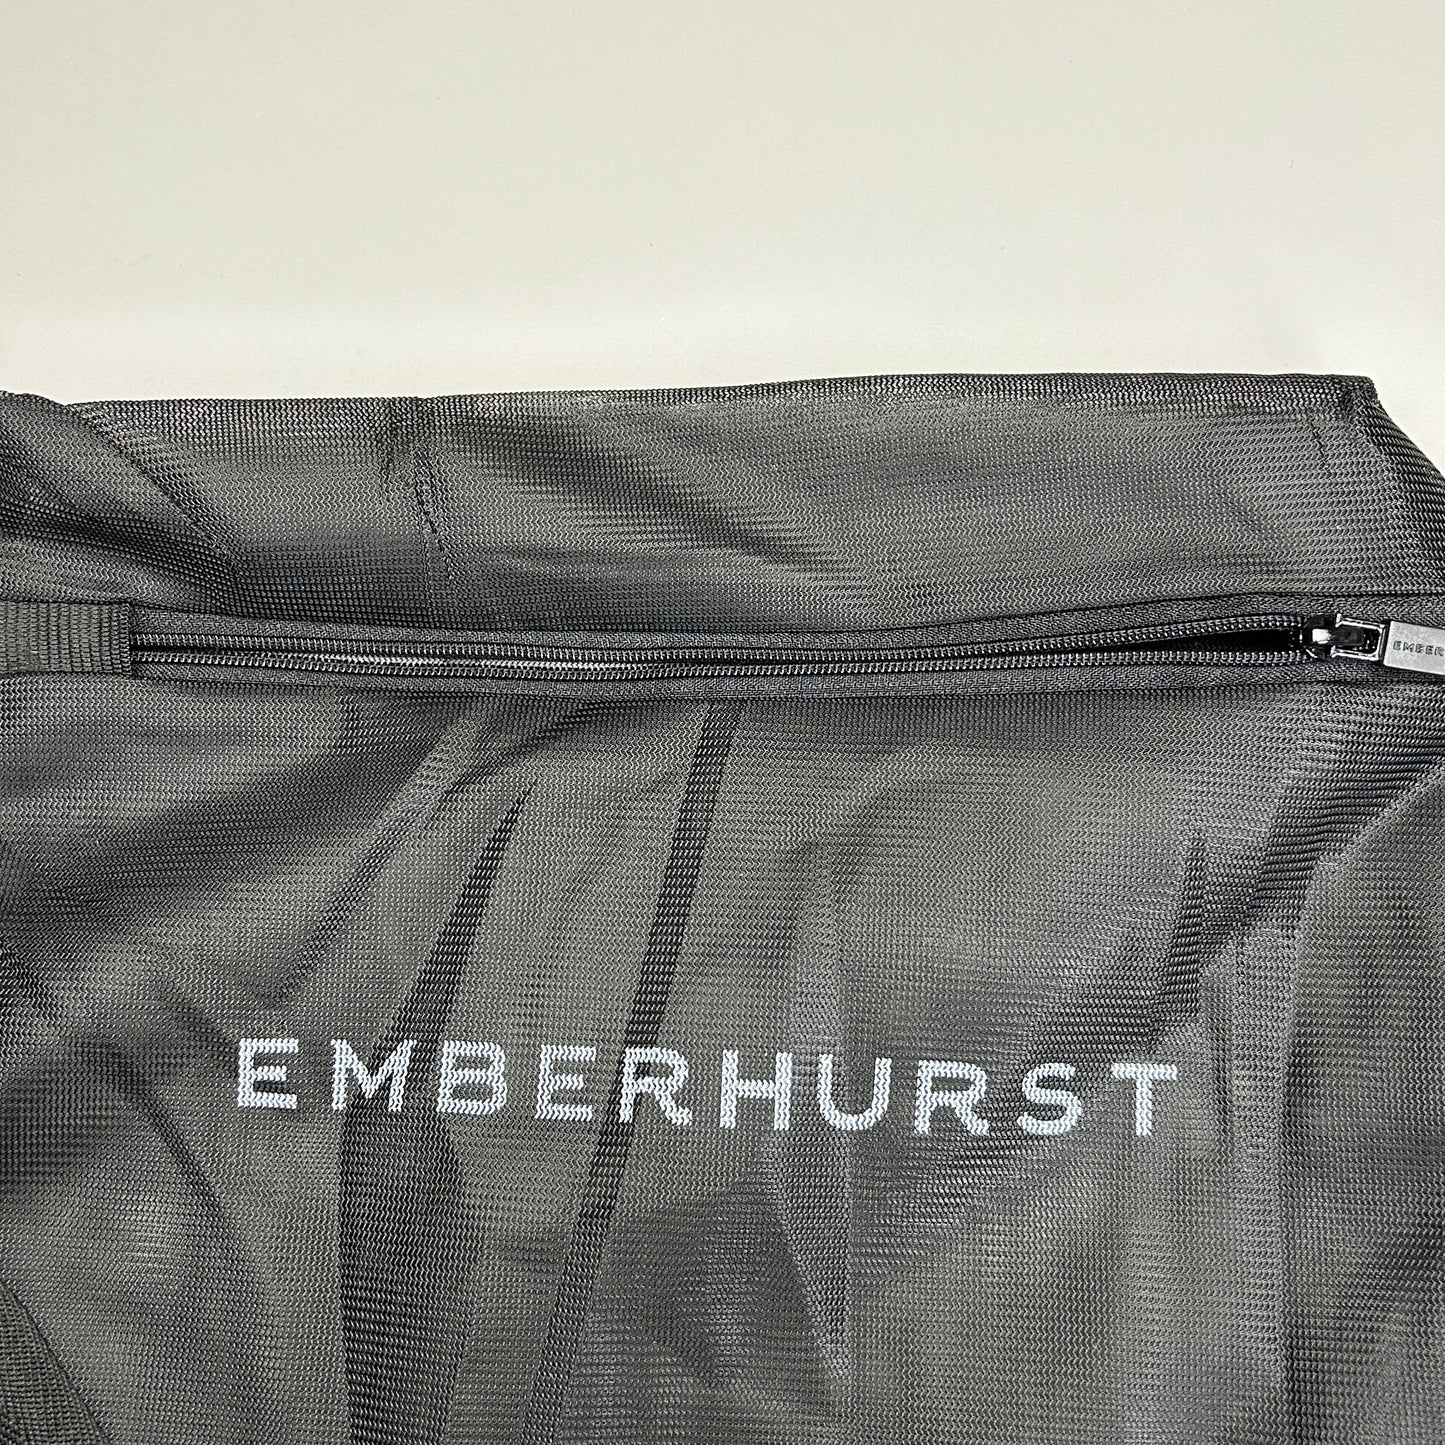 EMBERHURST 4 Pack! Mesh Carry Wash Bag With Zipper and Carrying handle Black (New)